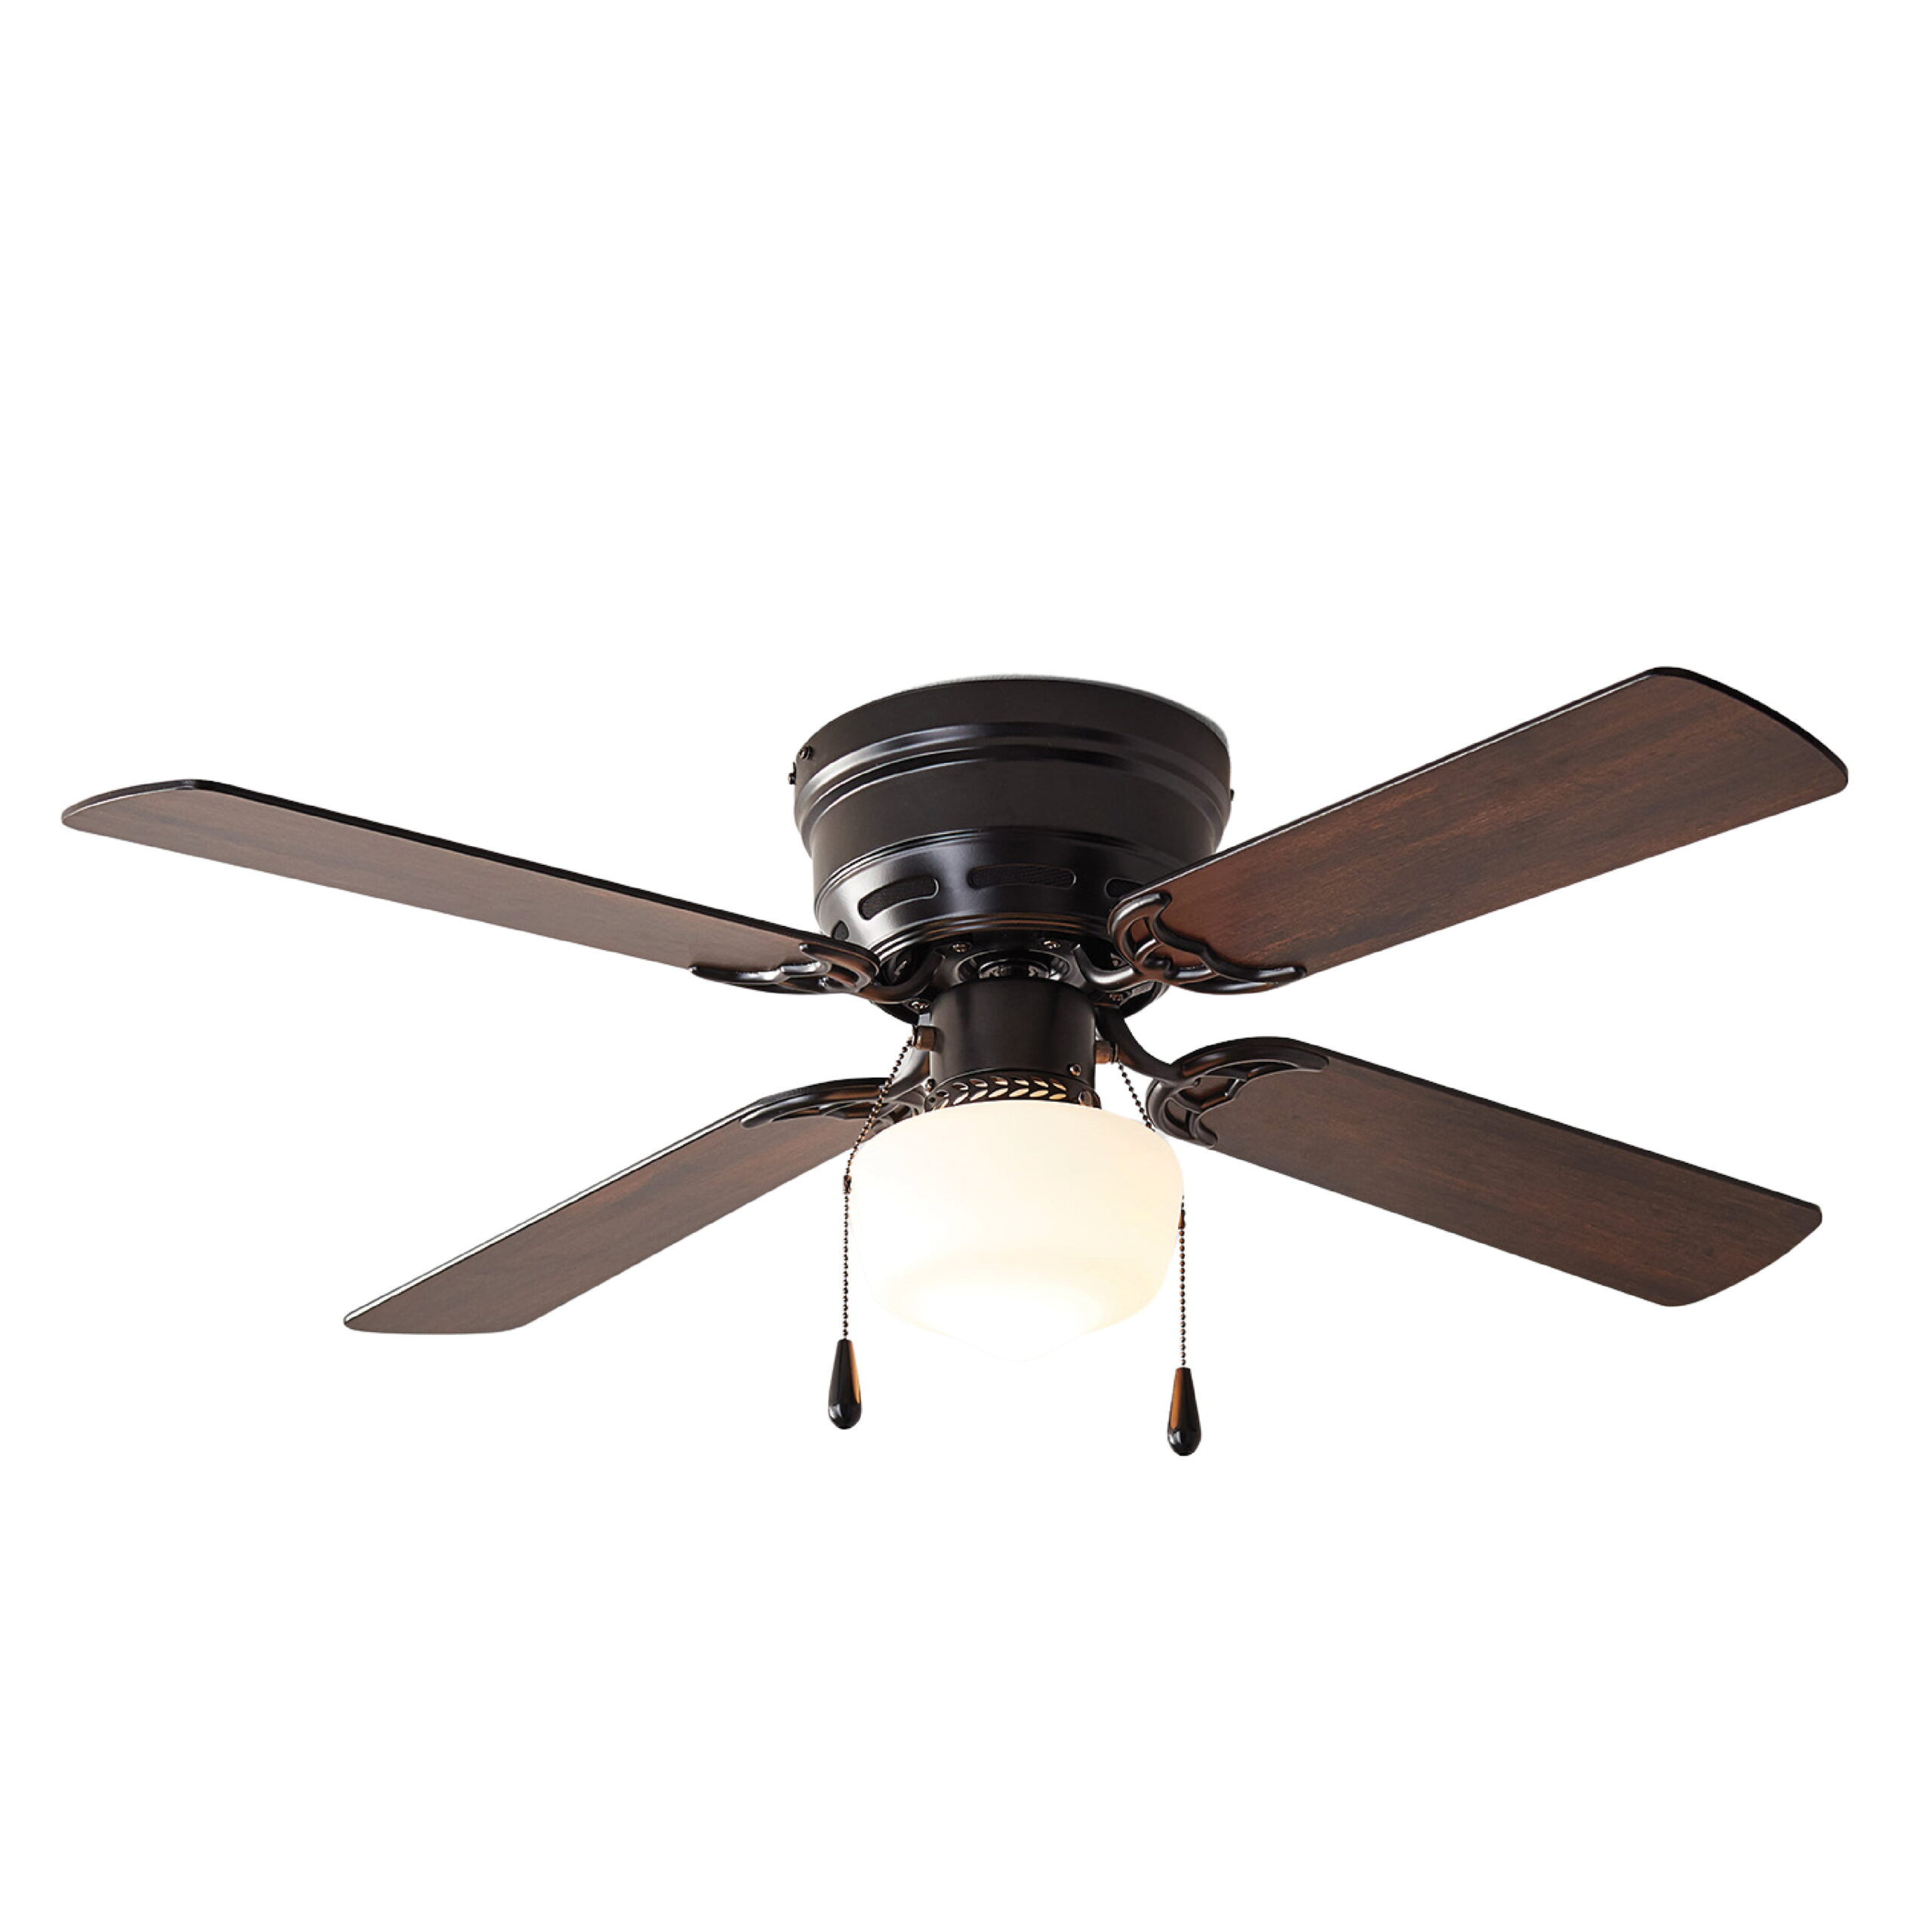 Mainstays 42 inch Hugger Indoor Ceiling Fan with Light Kit， Black， 4 Blades， Reverse Airflow